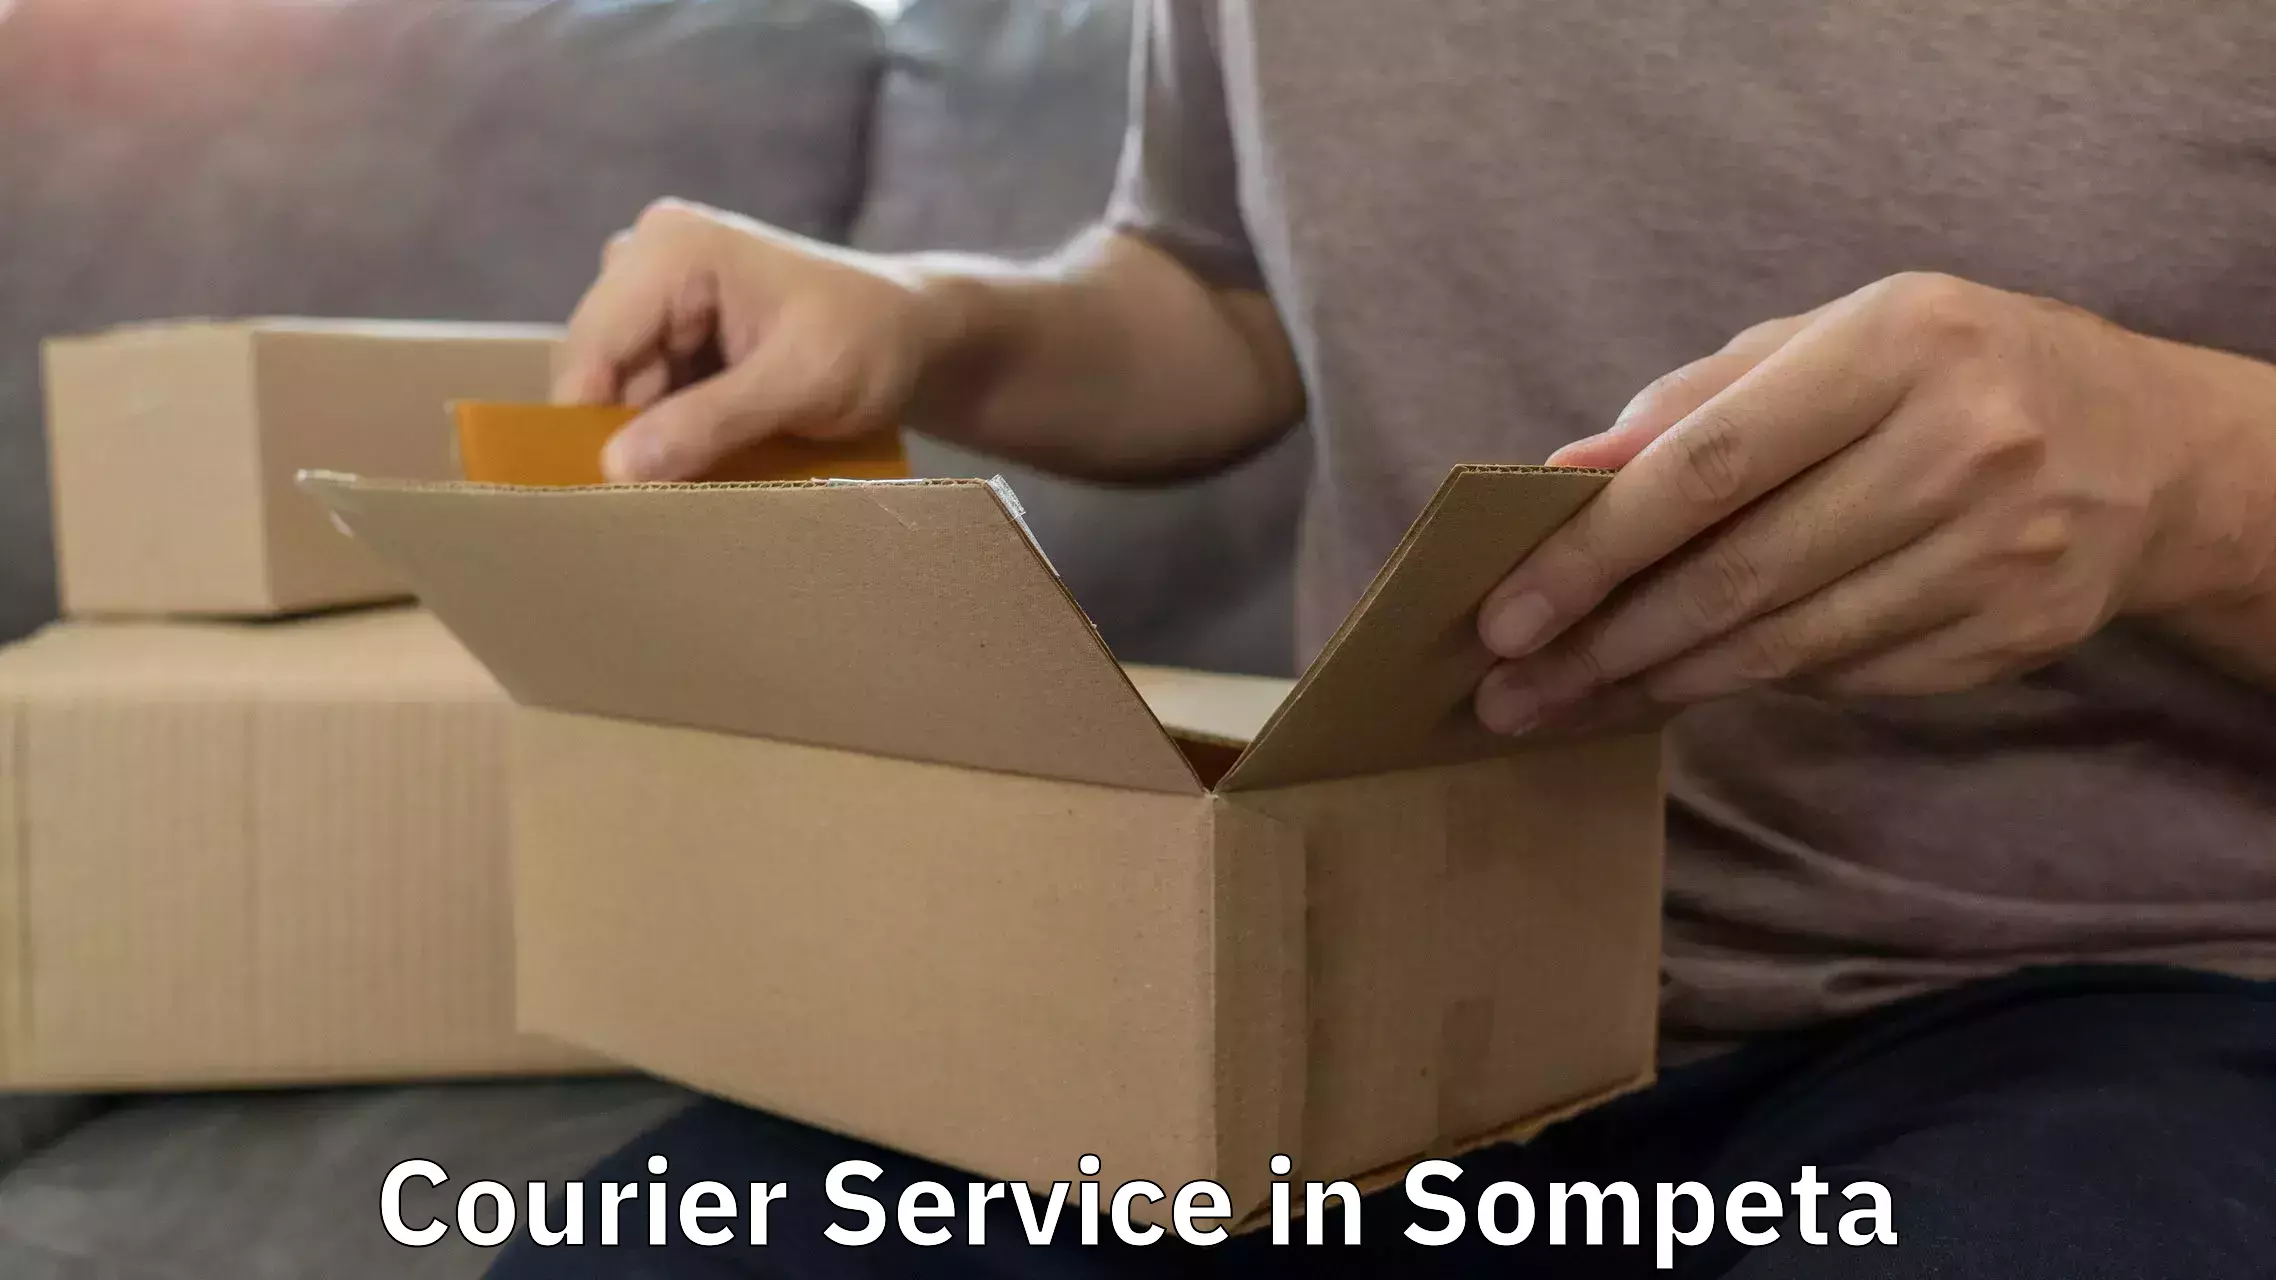 Fast delivery service in Sompeta